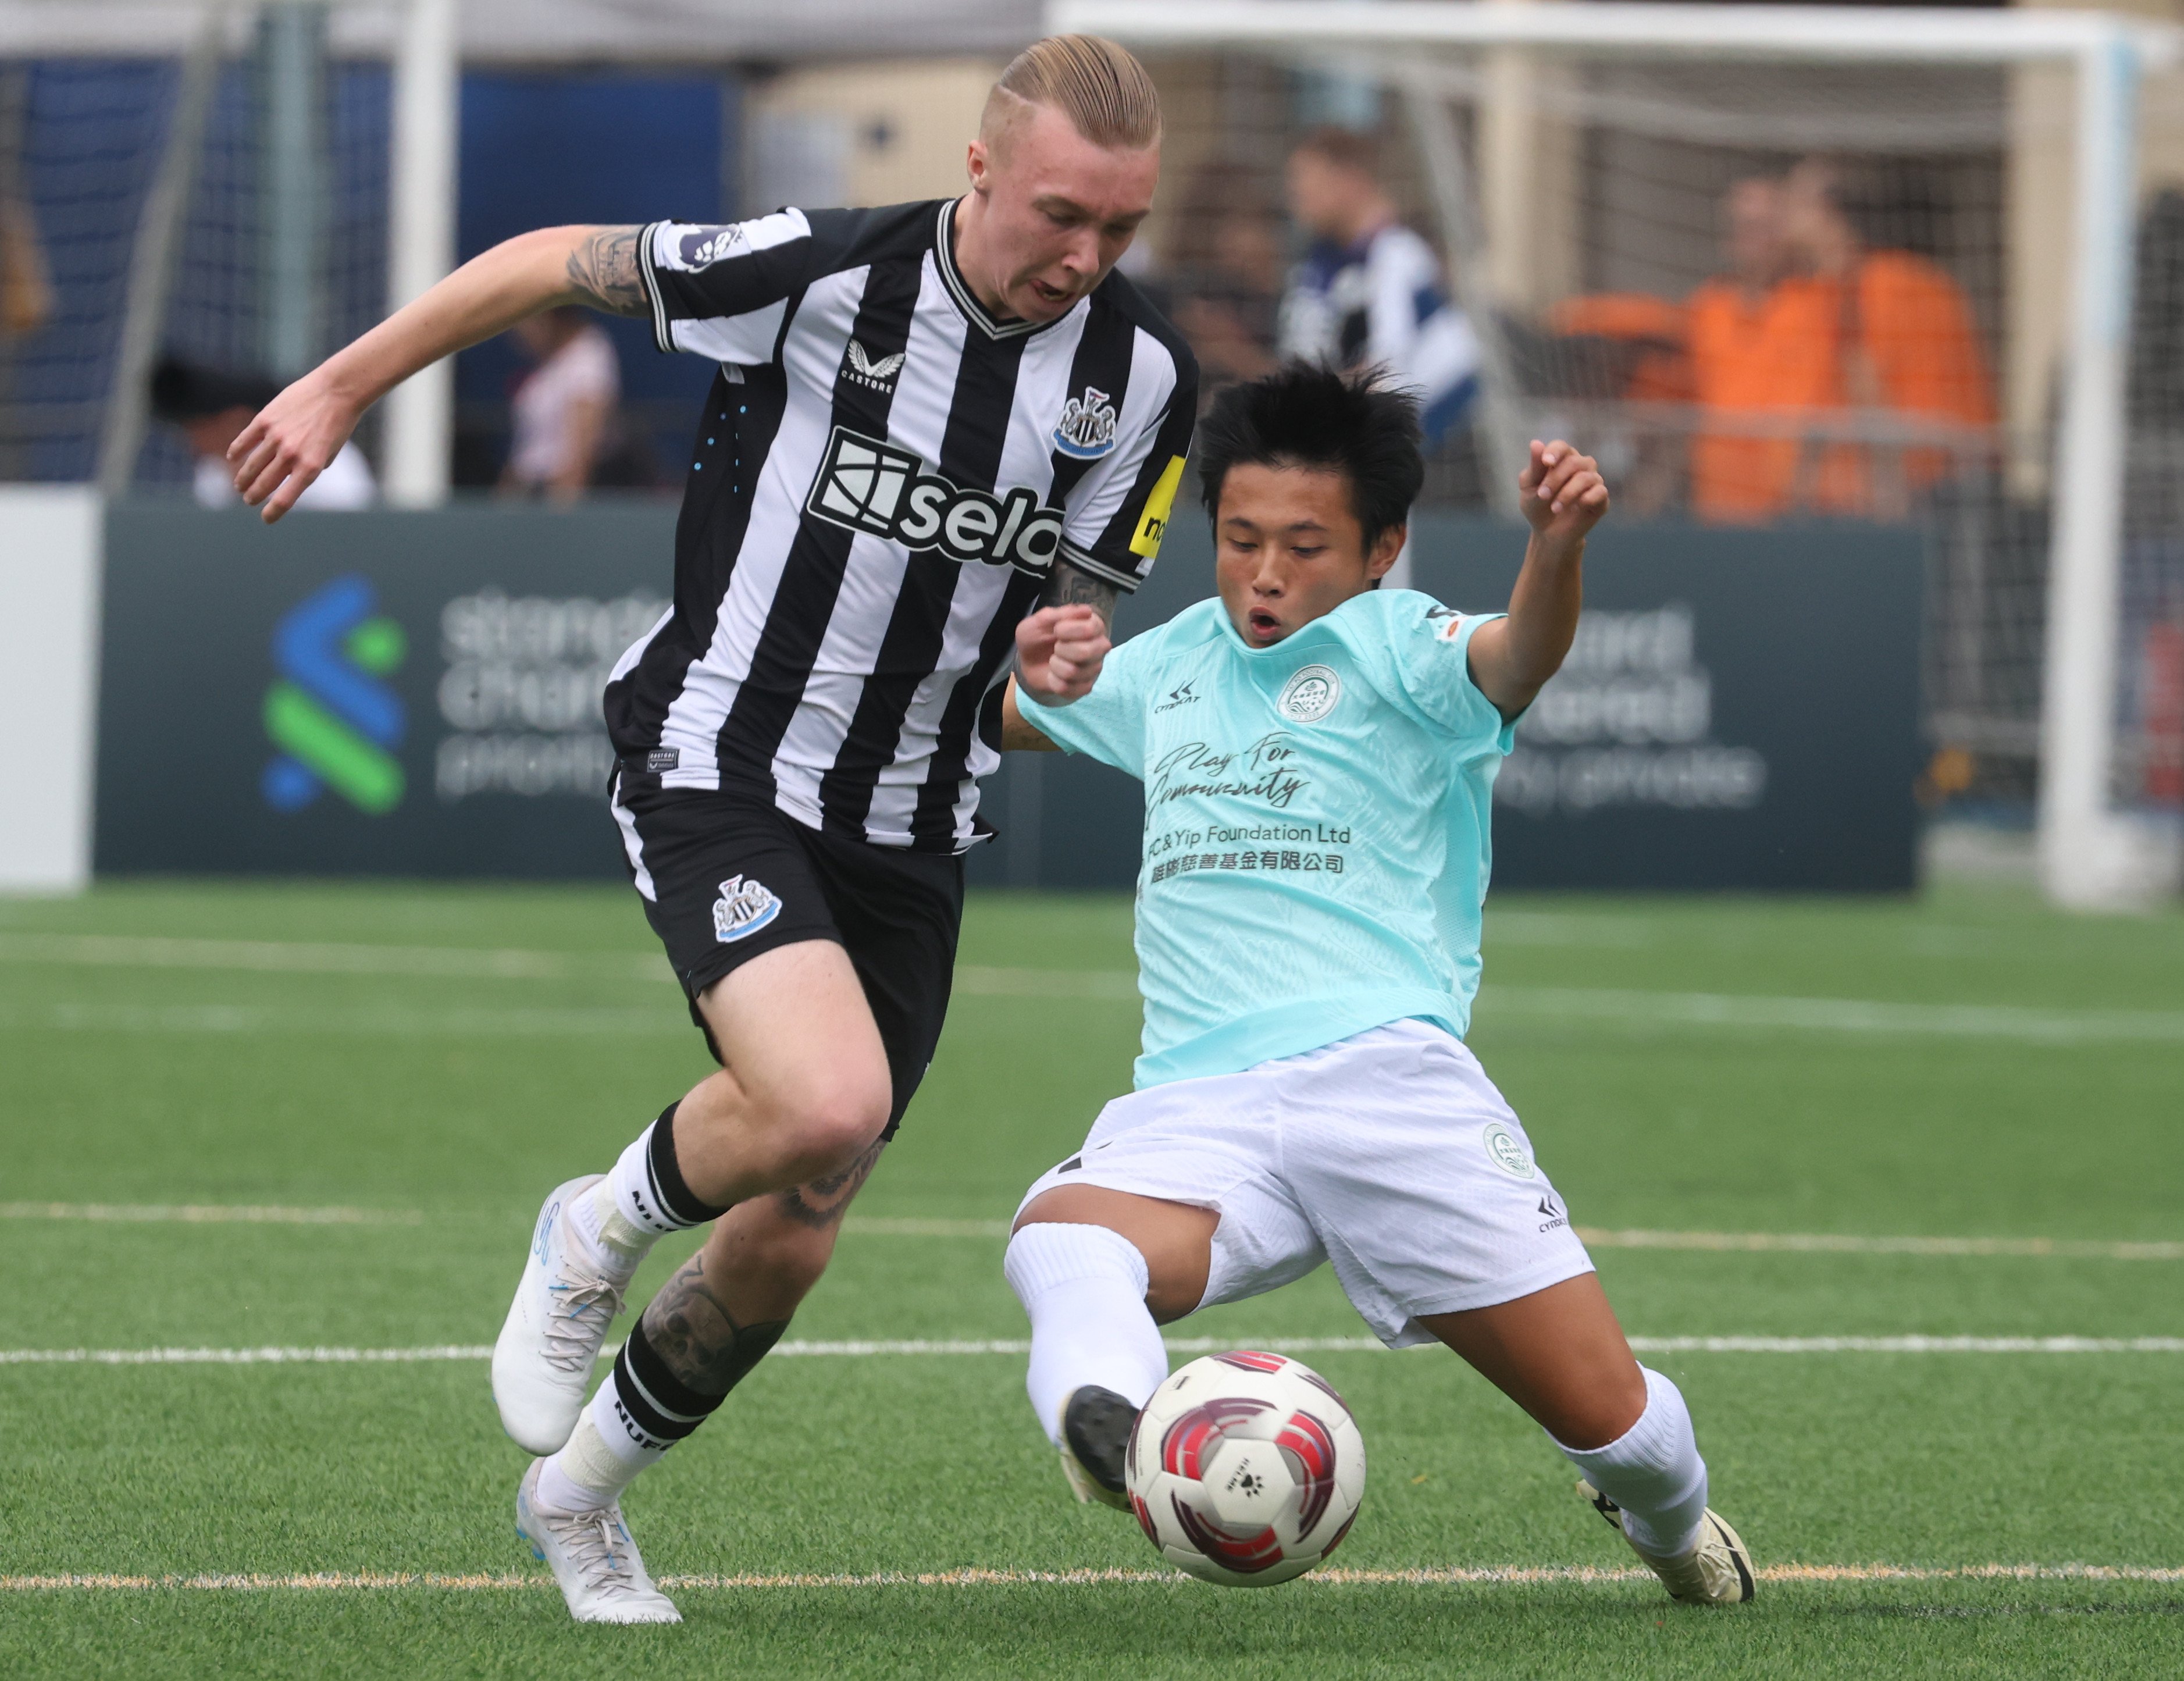 Newcastle United’s Alfe Harrison (left) fights for the ball with Football Club’s Yam Pung-pang at the HKFC Soccer Sevens. Photo: Yik Yeung-man